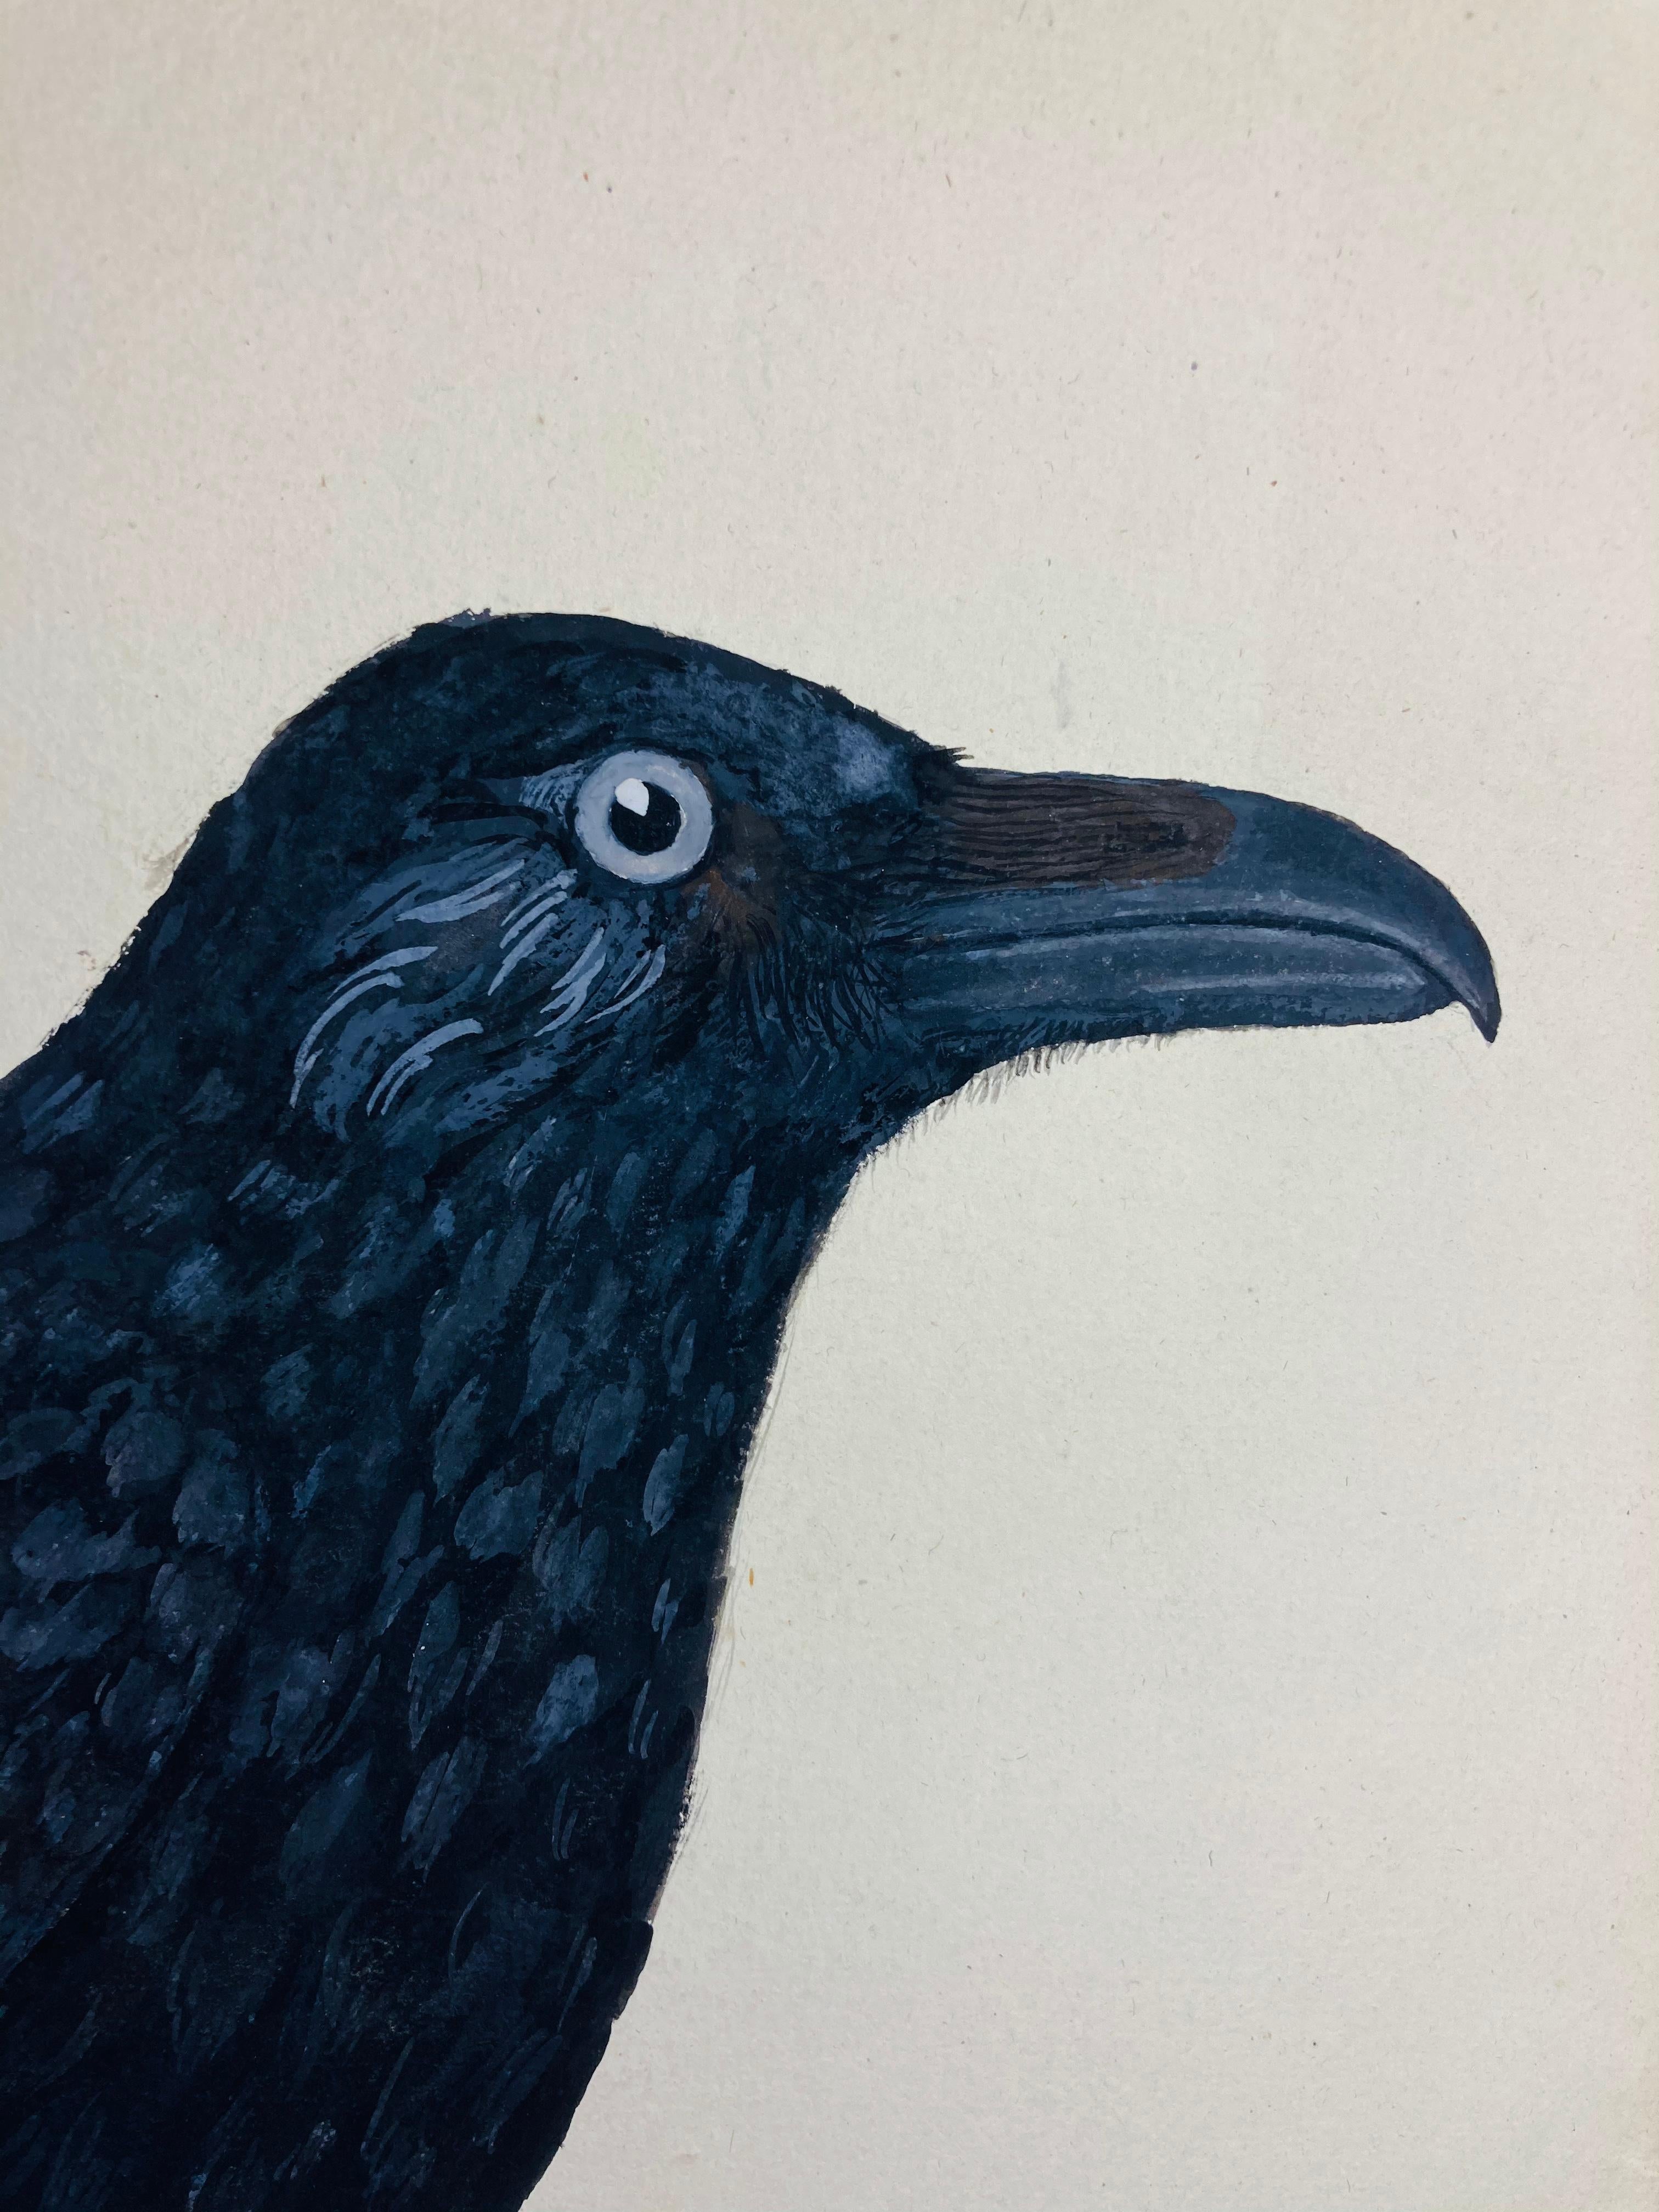 Animal drawing of sitting crow in black by enlightened british painter - Art by Peter Paillou